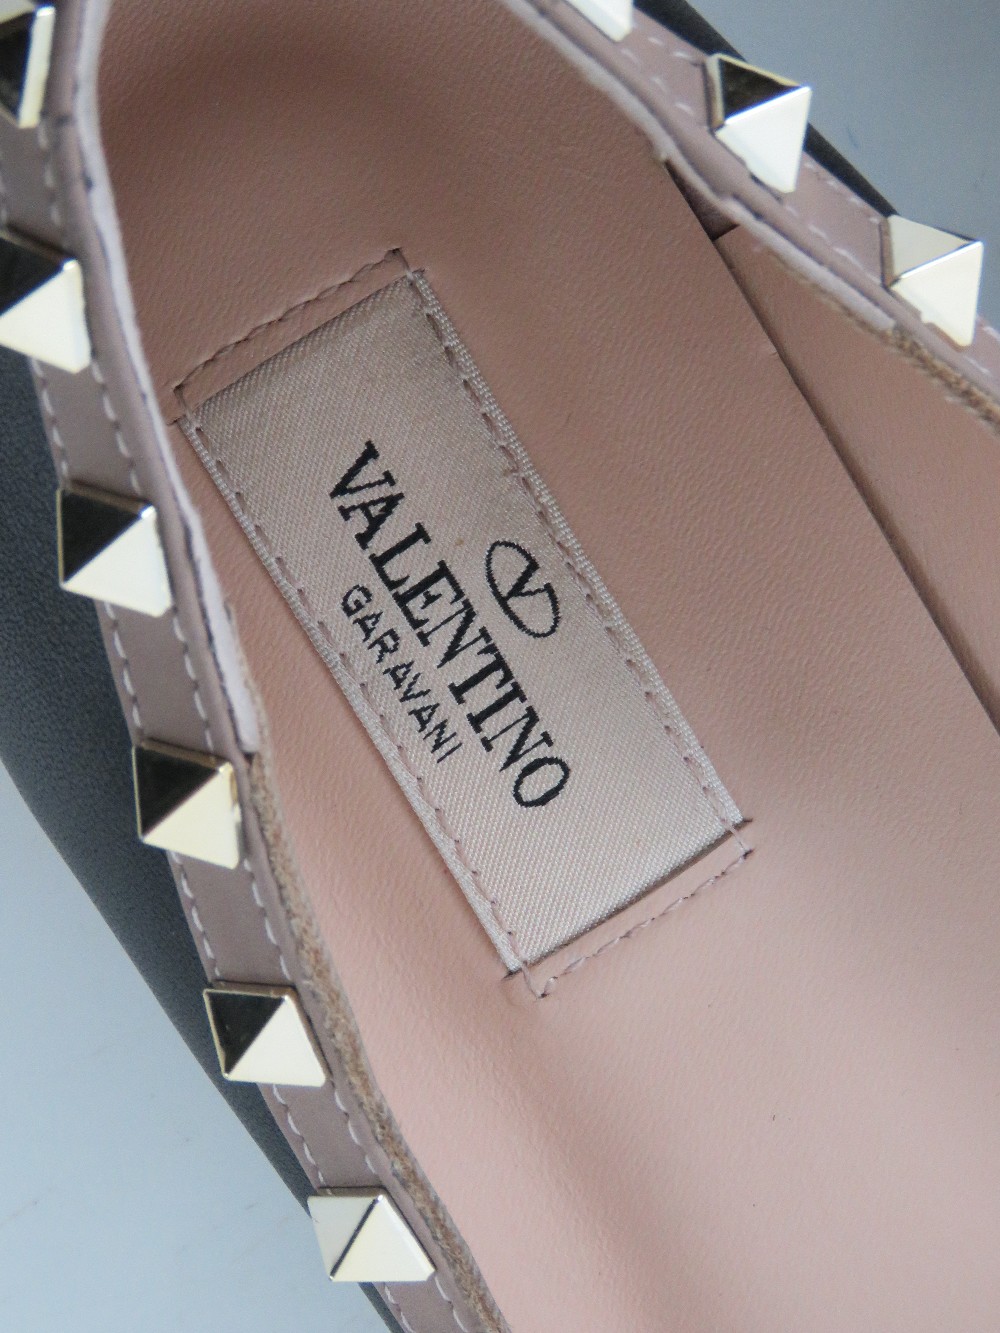 Valentino Garavani Rockstud pointed toe flat shoes in black and taupe leather, size 41, - Image 4 of 7